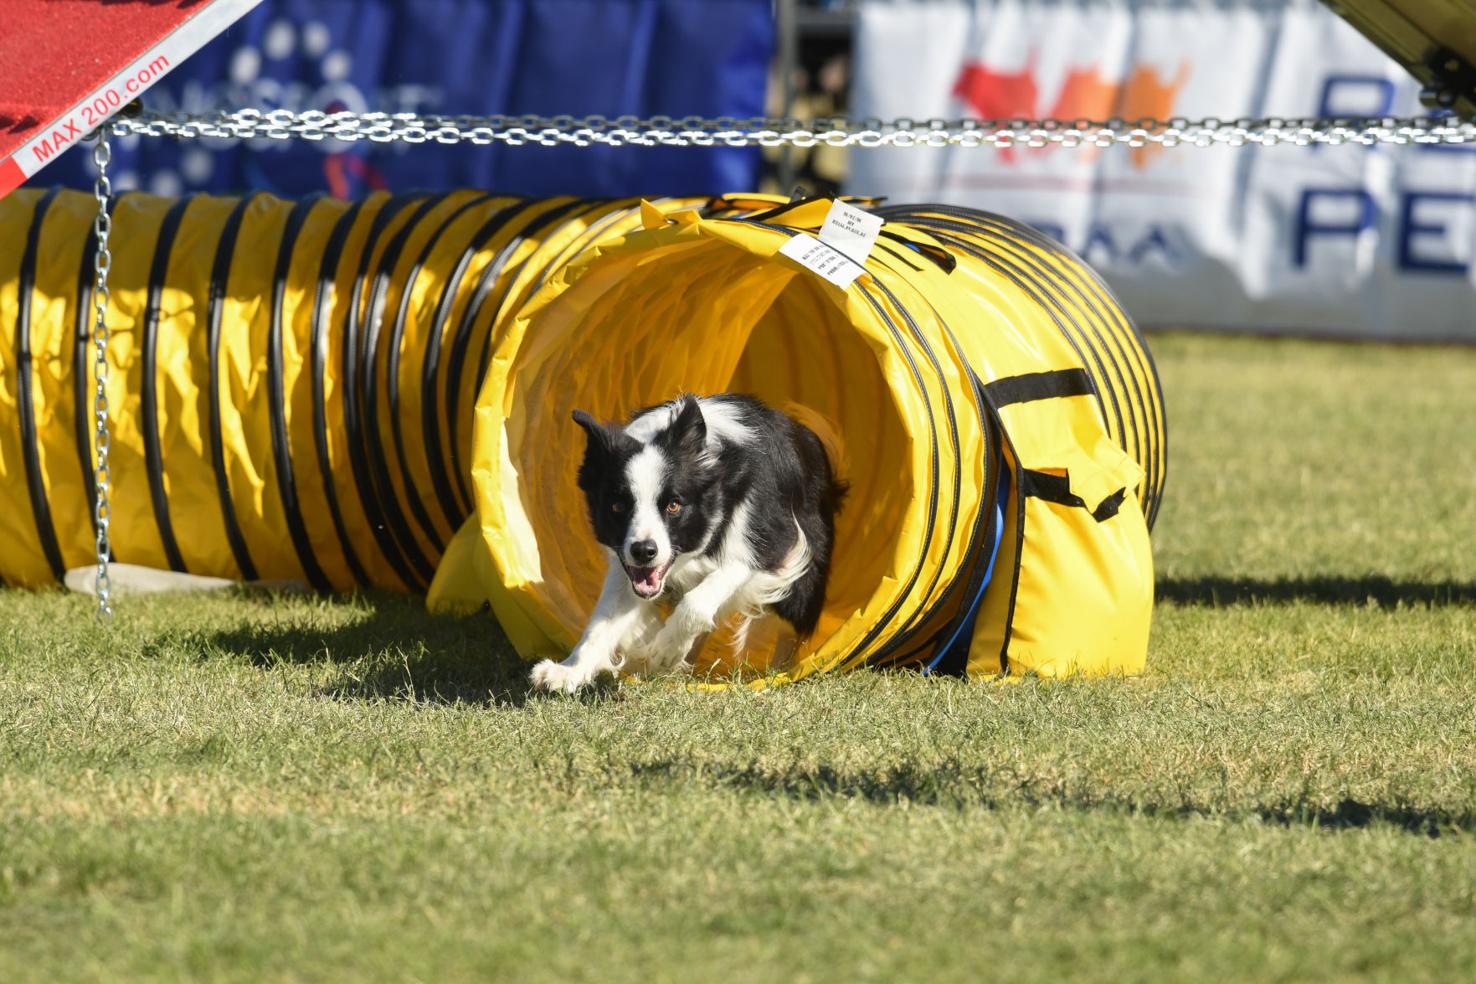 Dog agility championship comes to Hunter Jumper Classic Local